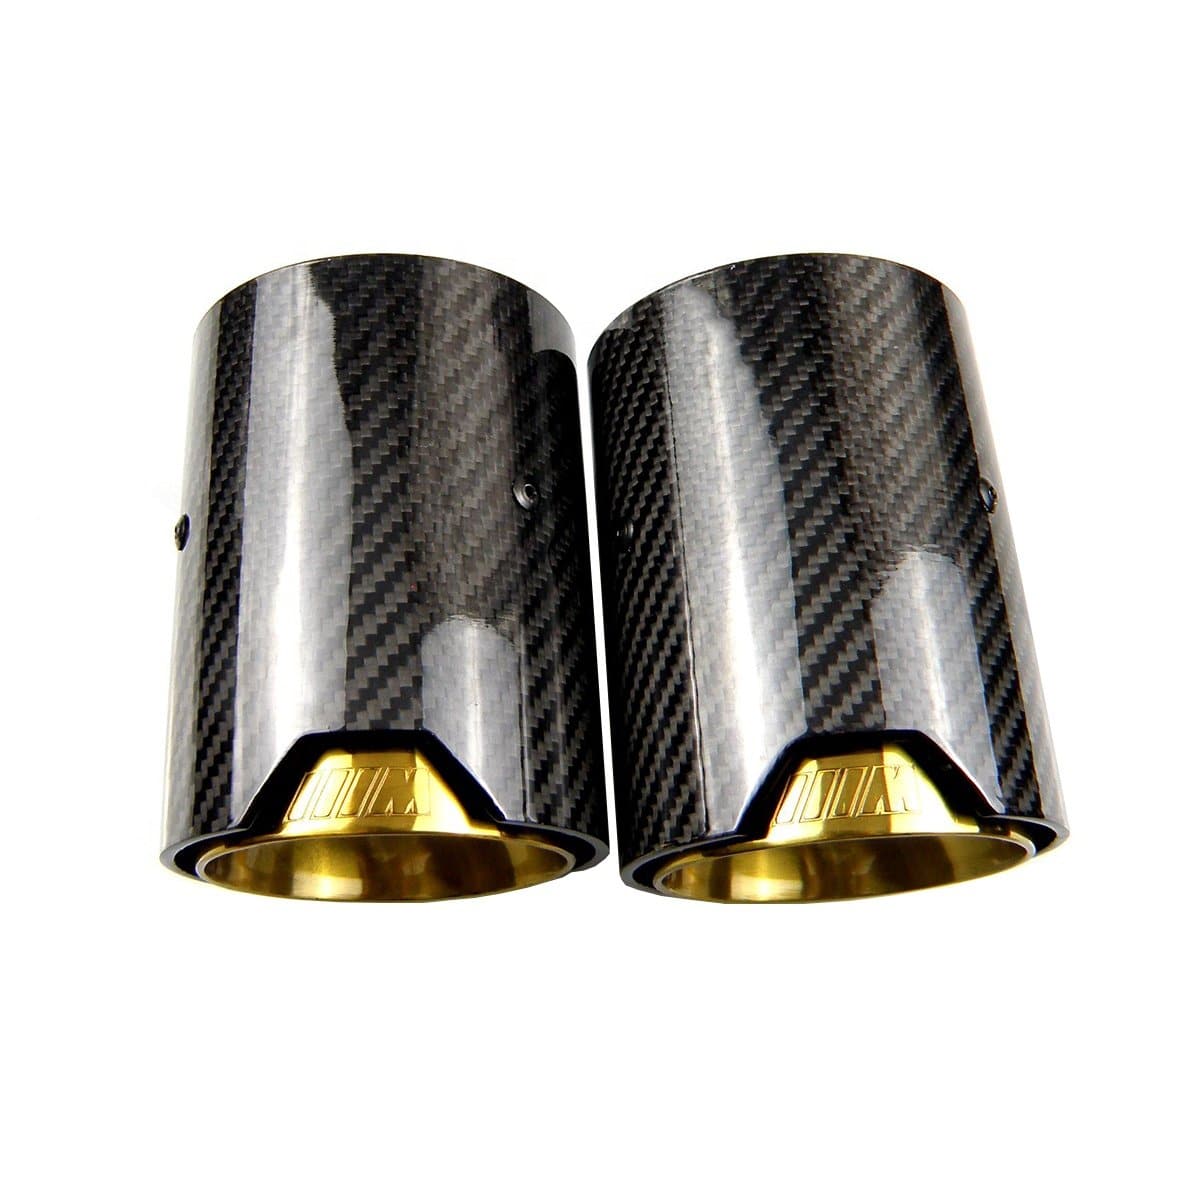 BMW M4 (F82/F83) Gold M Performance Style Carbon Fibre Exhaust Tips